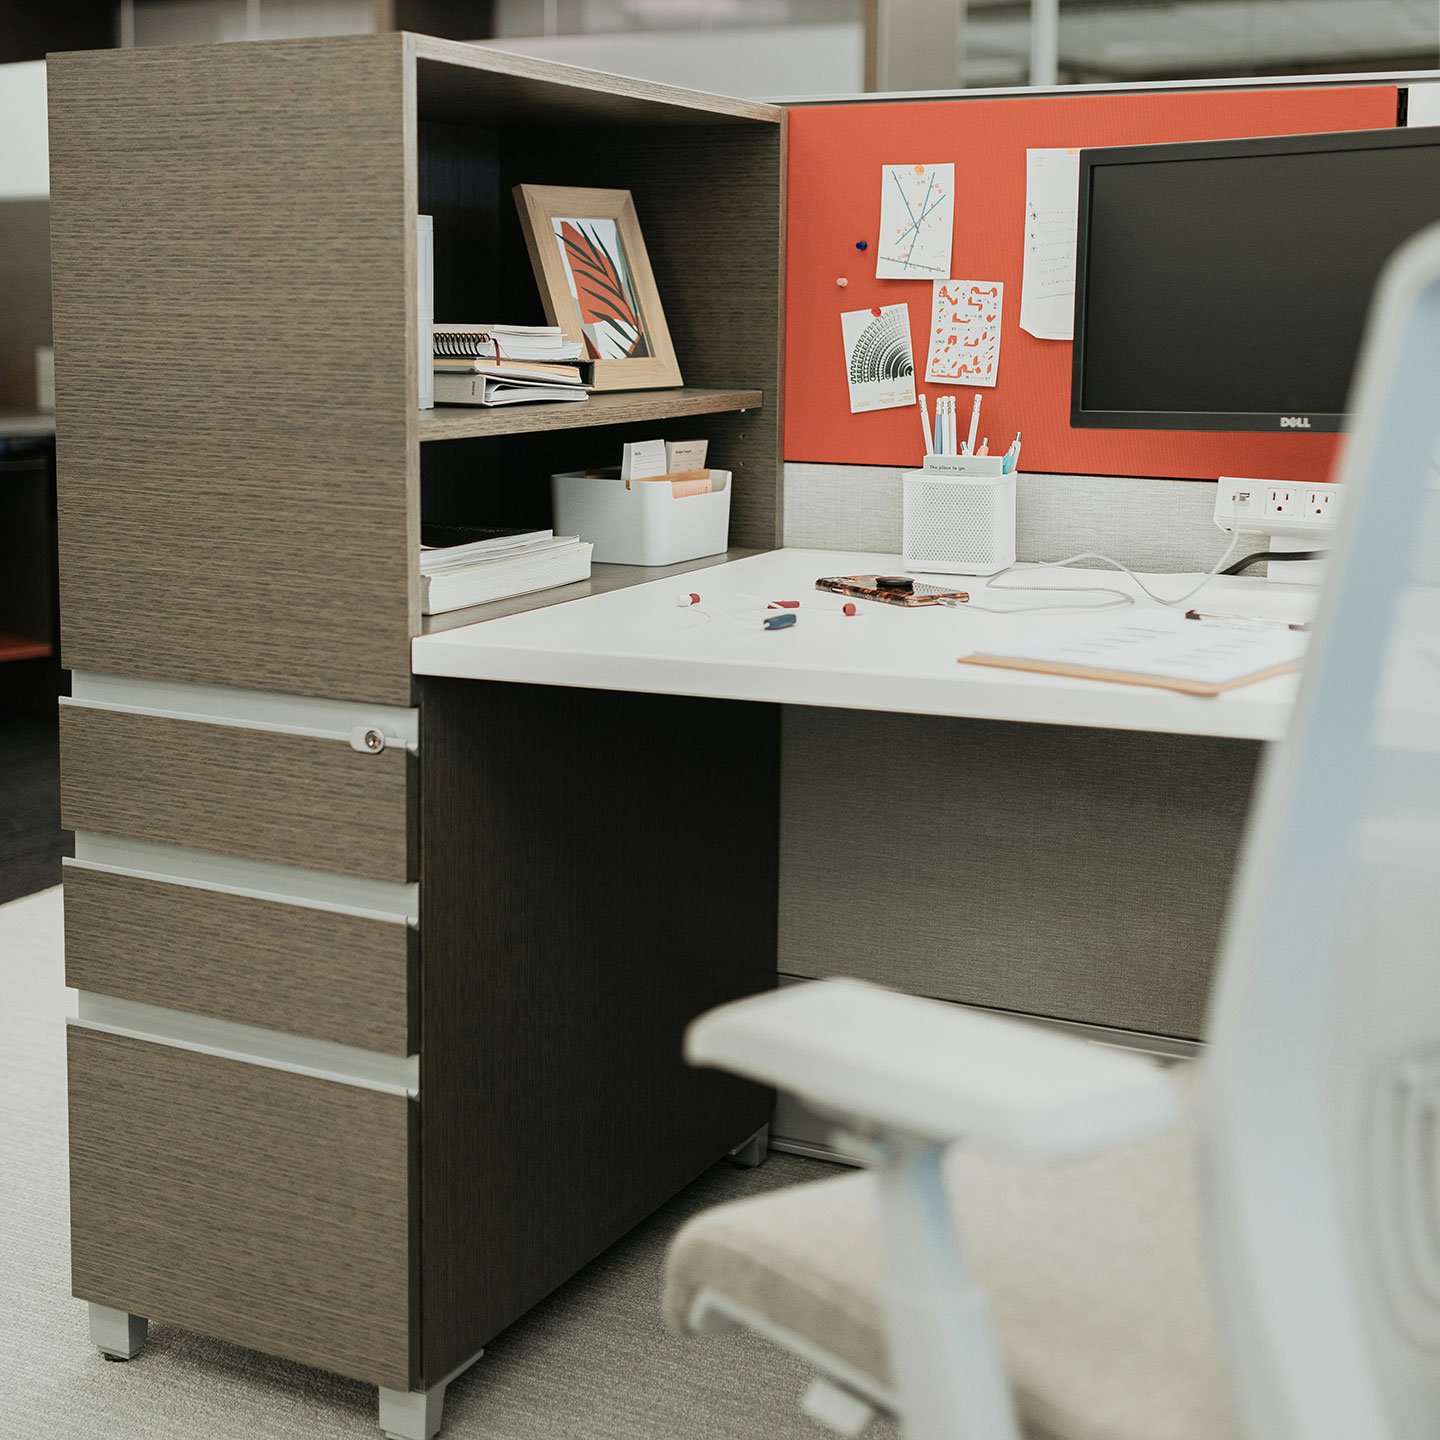 Compose storage unite at individual workspace with lock drawers and open shelves.   